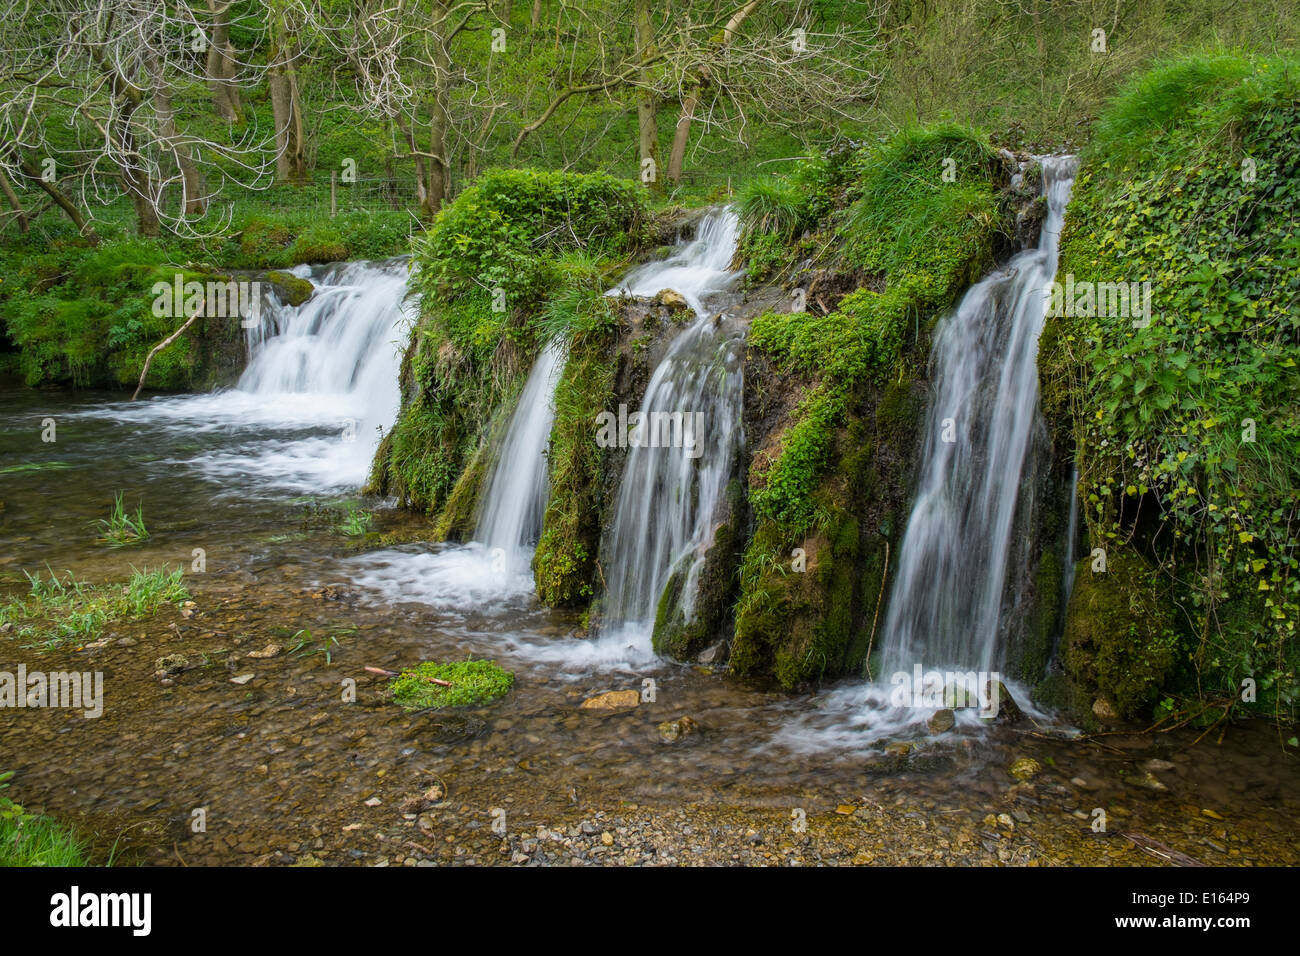 View of the River Lathkill, Lathkill dale, Peak District National Park, Derbyshire, England, May Stock Photo